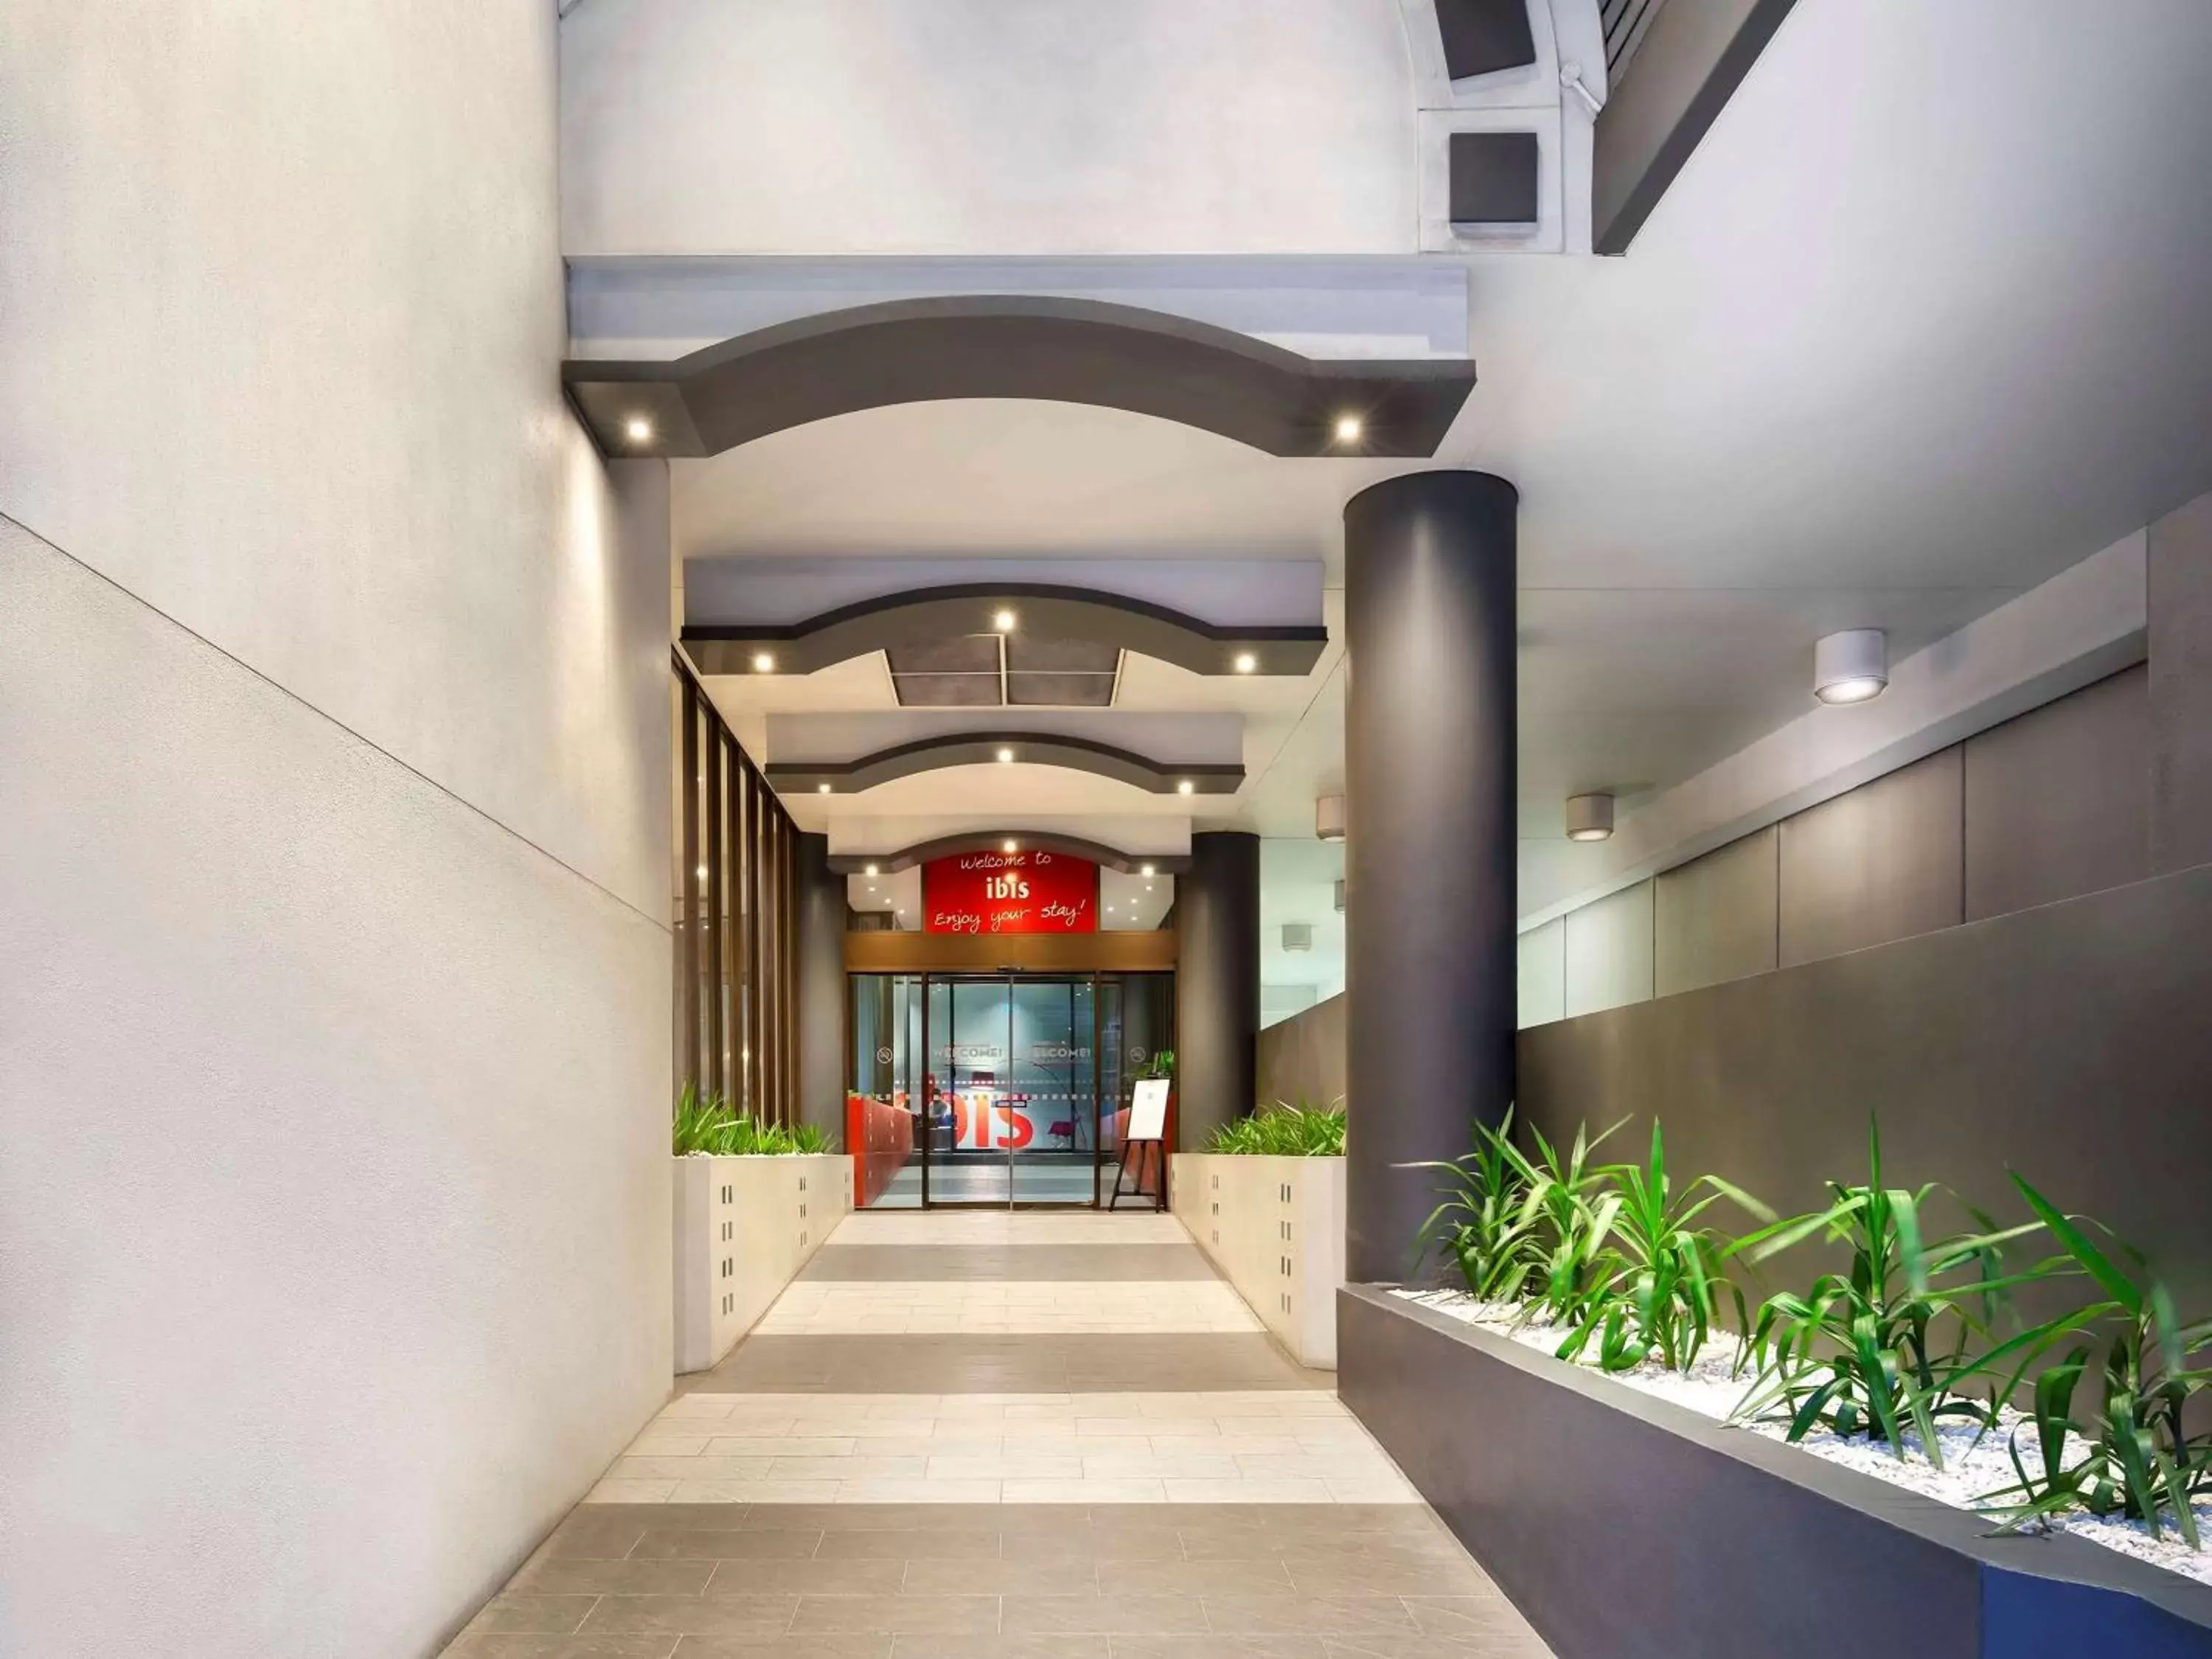 Property building in ibis Melbourne Hotel and Apartments